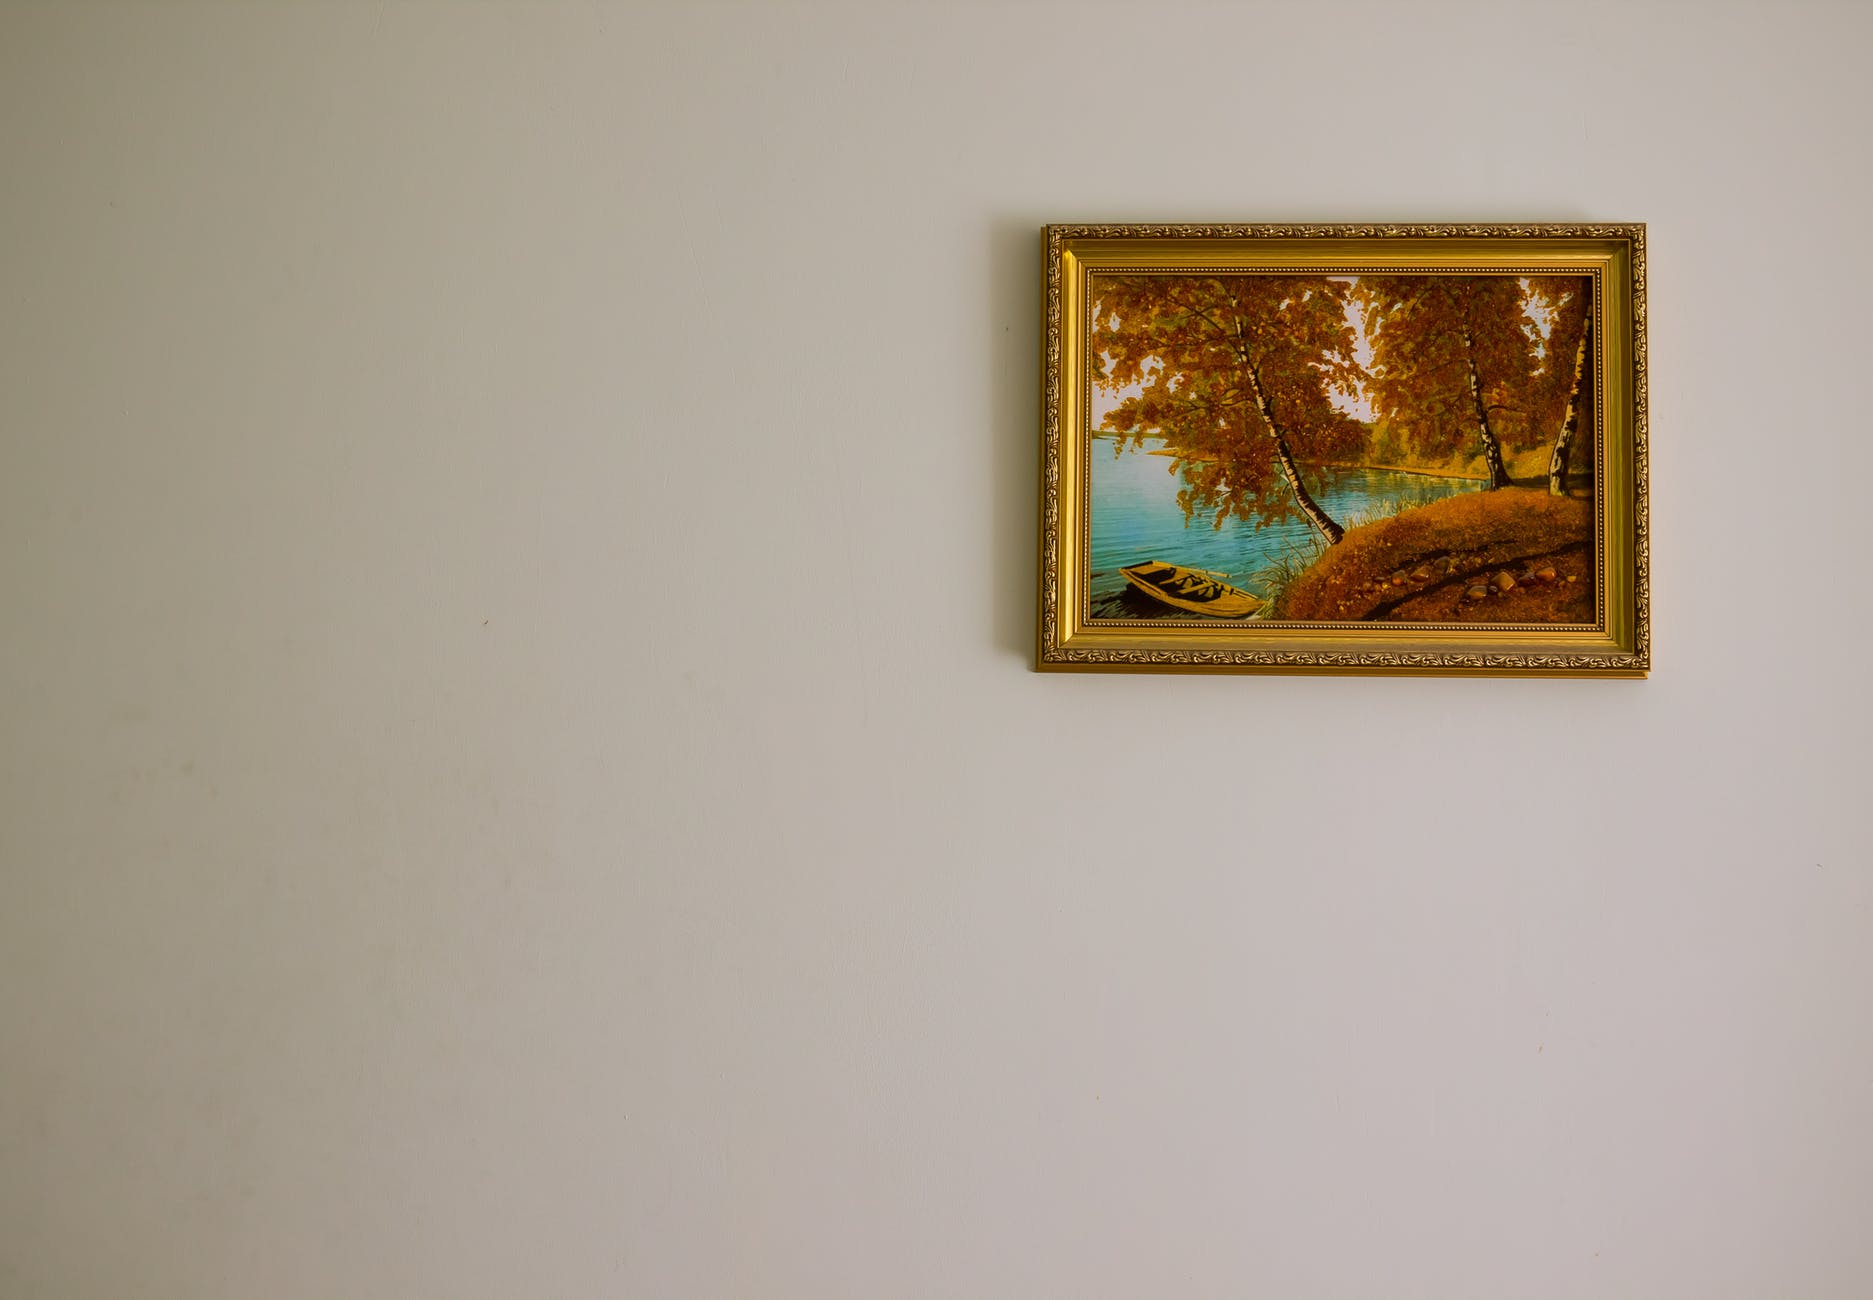 a single painting of a boat on a lake shaded by autumn trees in a gold frame hangs on a bare, beige wall 